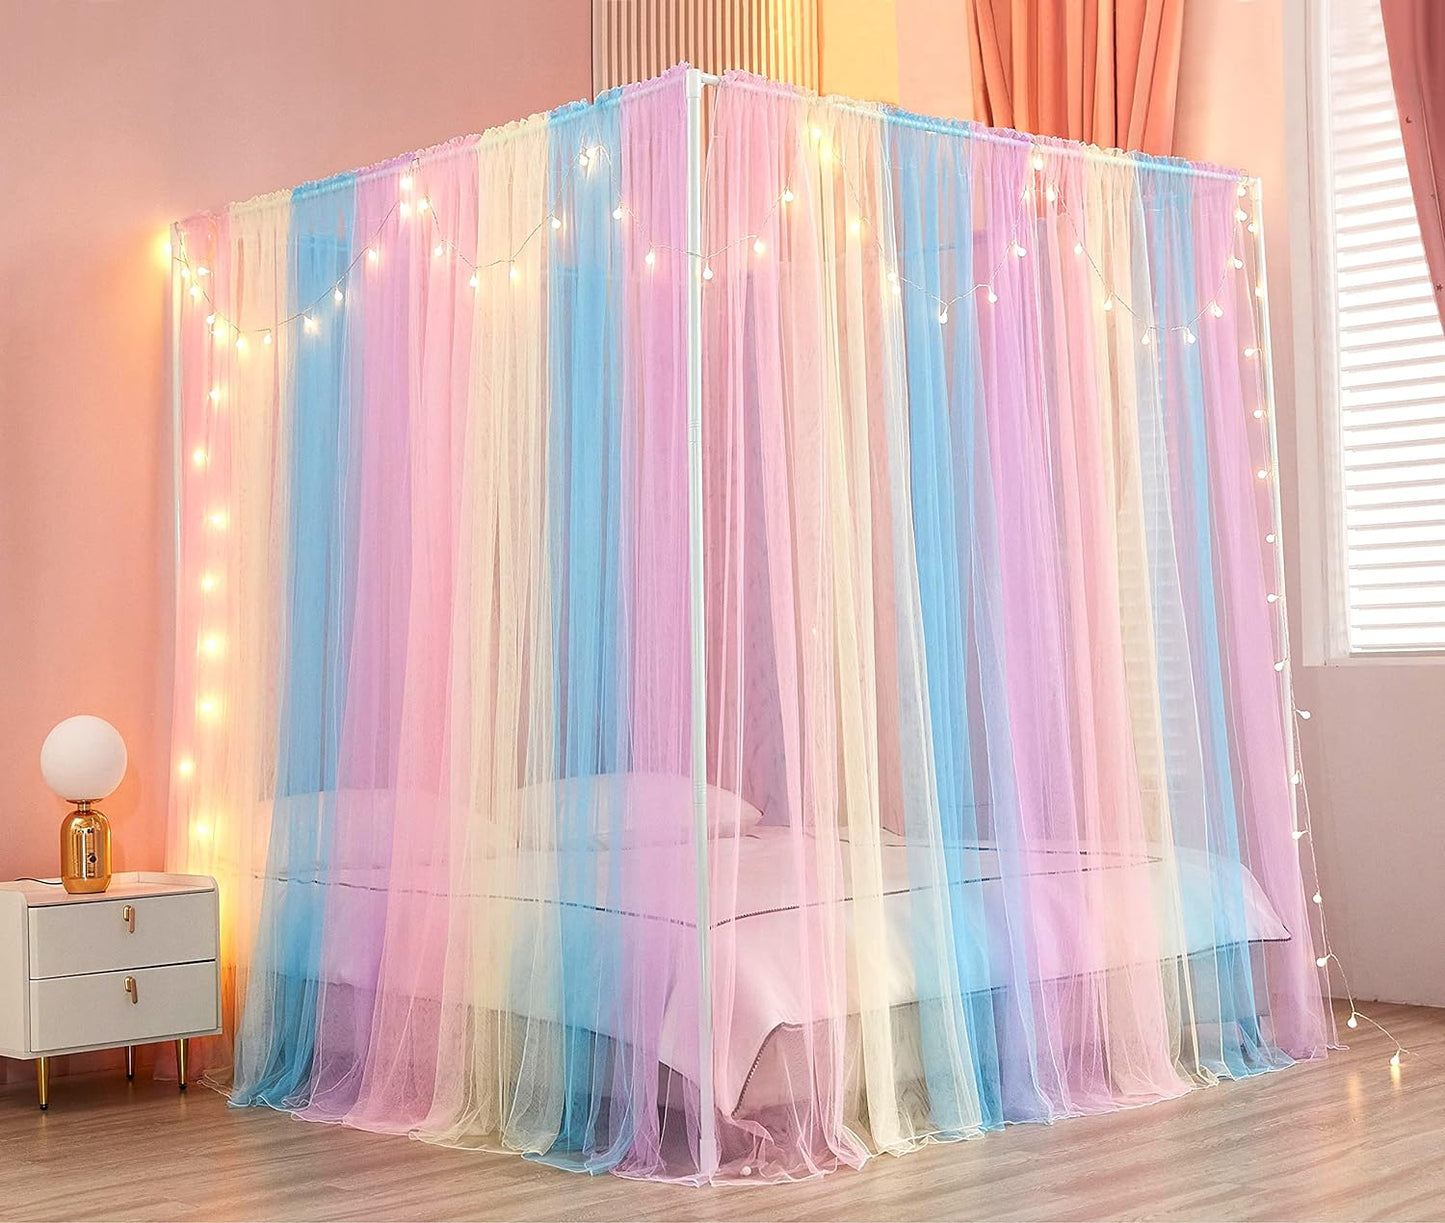 Akiky Princess Canopy Bed Curtains Bed Canopy Curtains with Lights for Queen Size Bed Drapes,8 Panels Canopies with 2 Lights,Room Décor (Full/Queen, White)  Akiky Rainbow King 